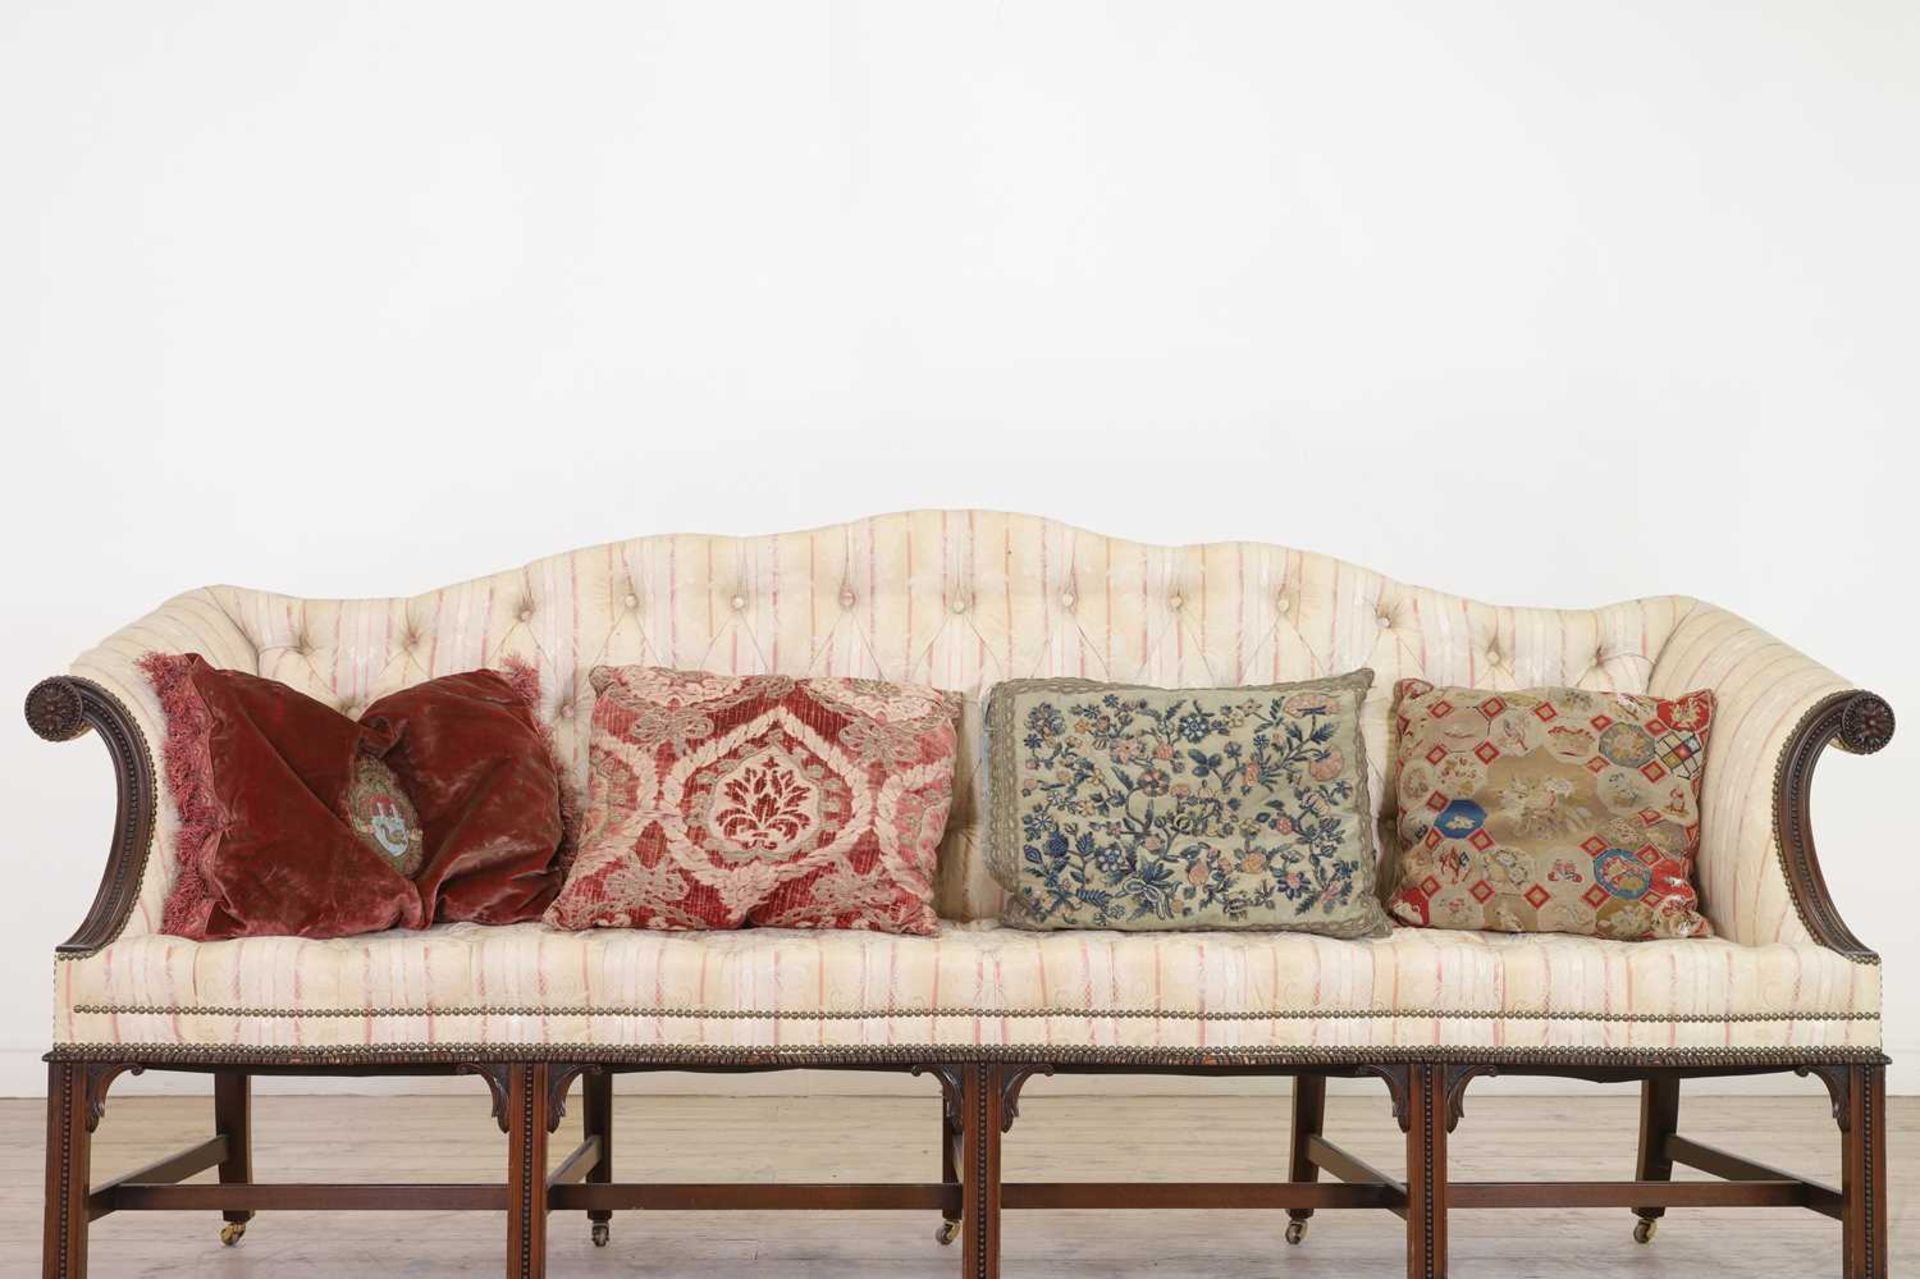 A group of four cushions,